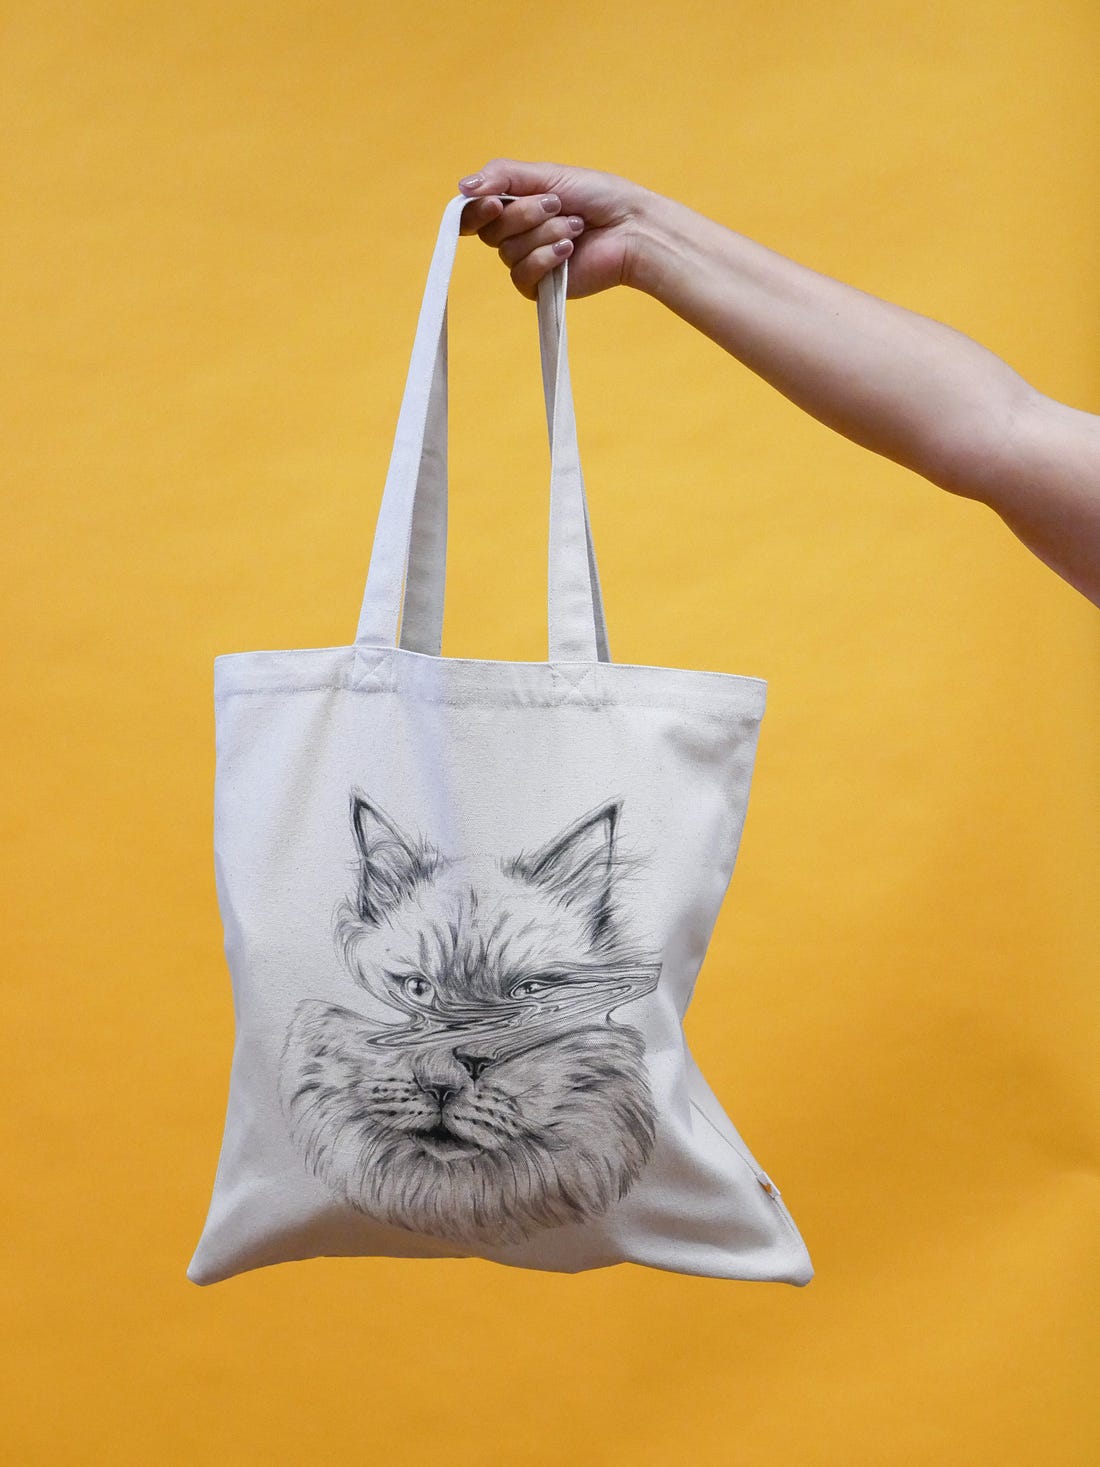 New tee and tote from Henri, which features a very fine pen drawing of a warped cat's face